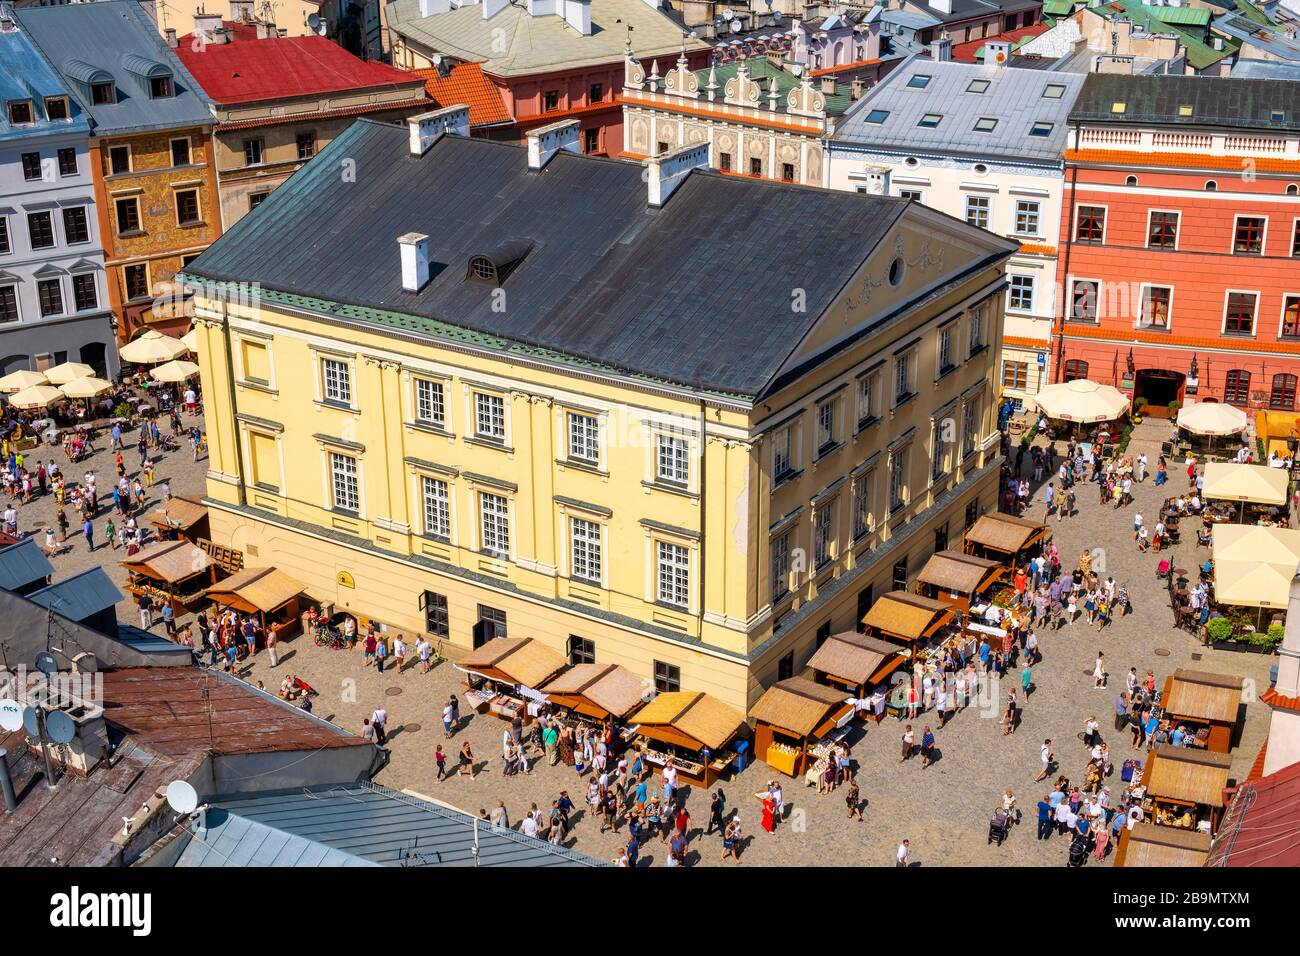 Lublin, Lubelskie / Poland - 2019/08/18: Panoramic view of old town quarter with market square and historic XVI century High Royal Court building - Tr Stock Photo